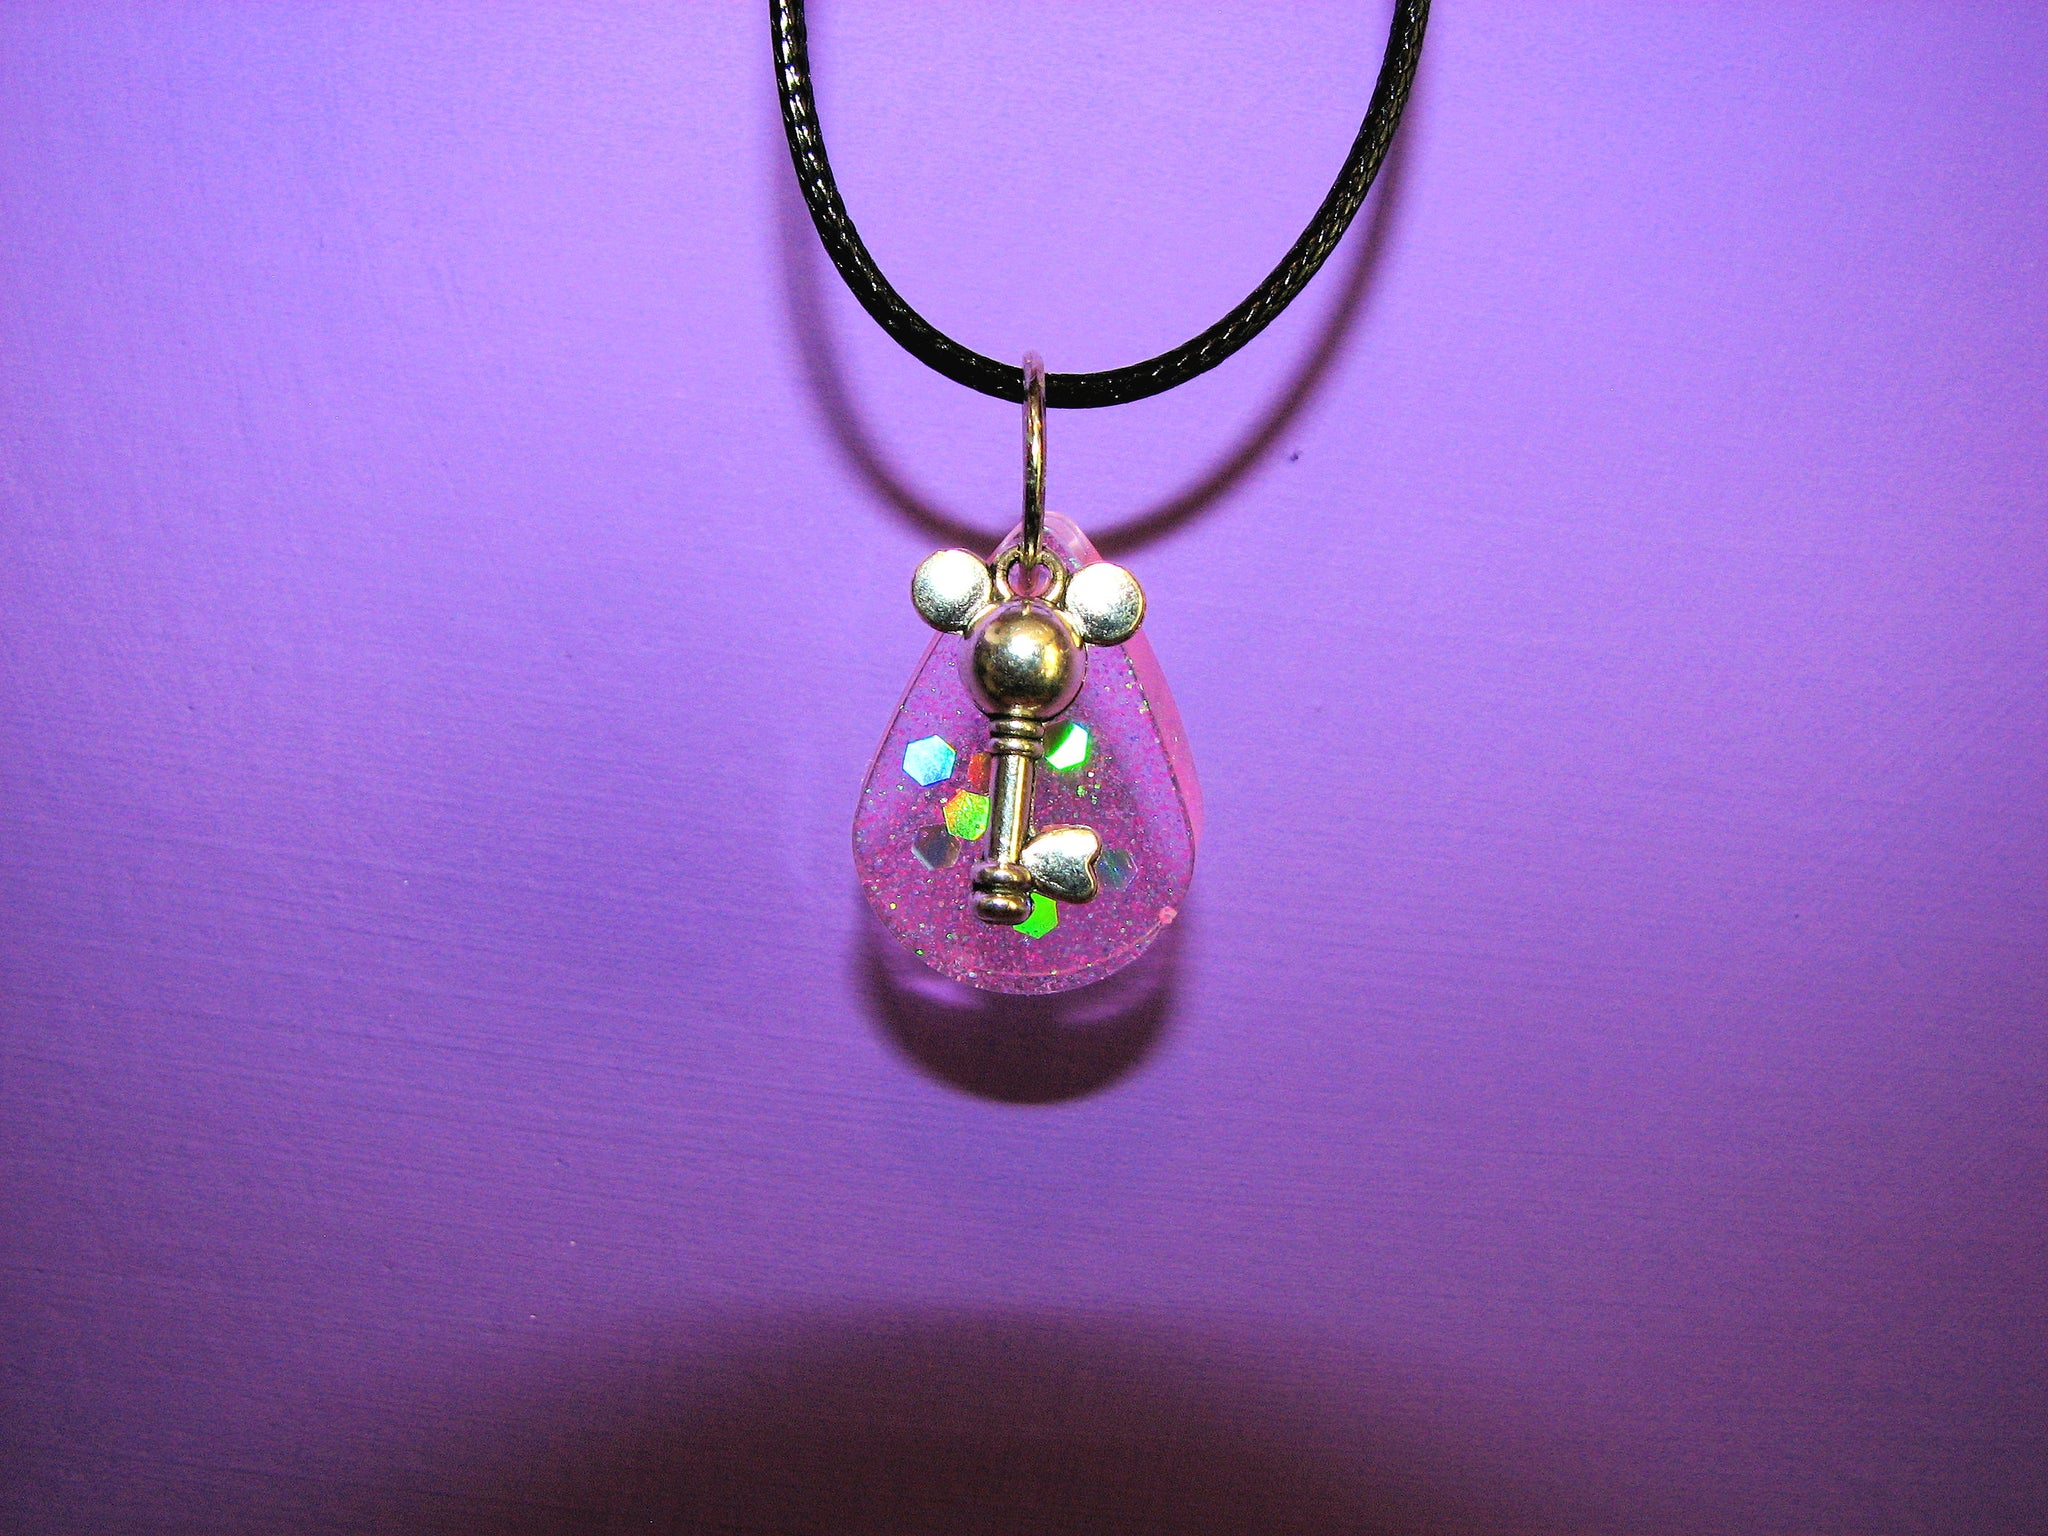 Mouse Ears Key Charm Necklace